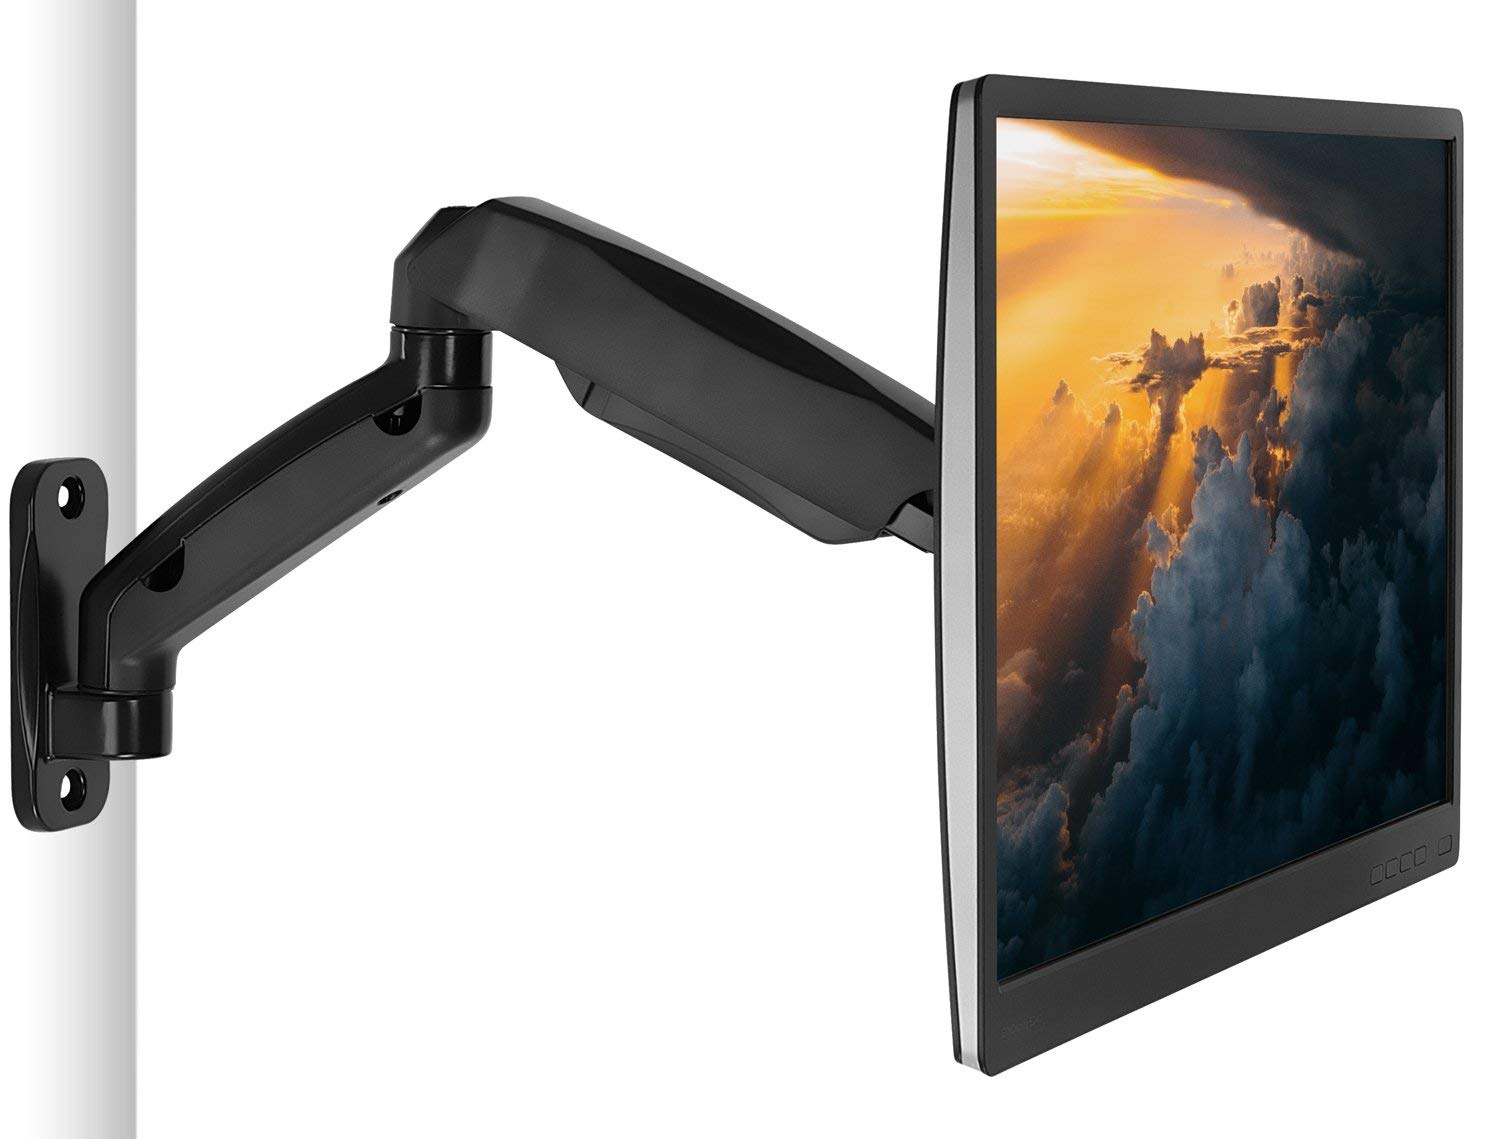 What should I consider when adjusting the height using a VESA-compatible monitor arm or mount? When using a VESA-compatible monitor arm or mount, ensure that the arm or mount is securely attached to the back of the monitor. Adjust the height by loosening the appropriate screws or knobs on the arm or mount, then raise or lower the monitor to the desired height. Once in the desired position, tighten the screws or knobs to secure the monitor in place.
What is the recommended height for a Dell monit